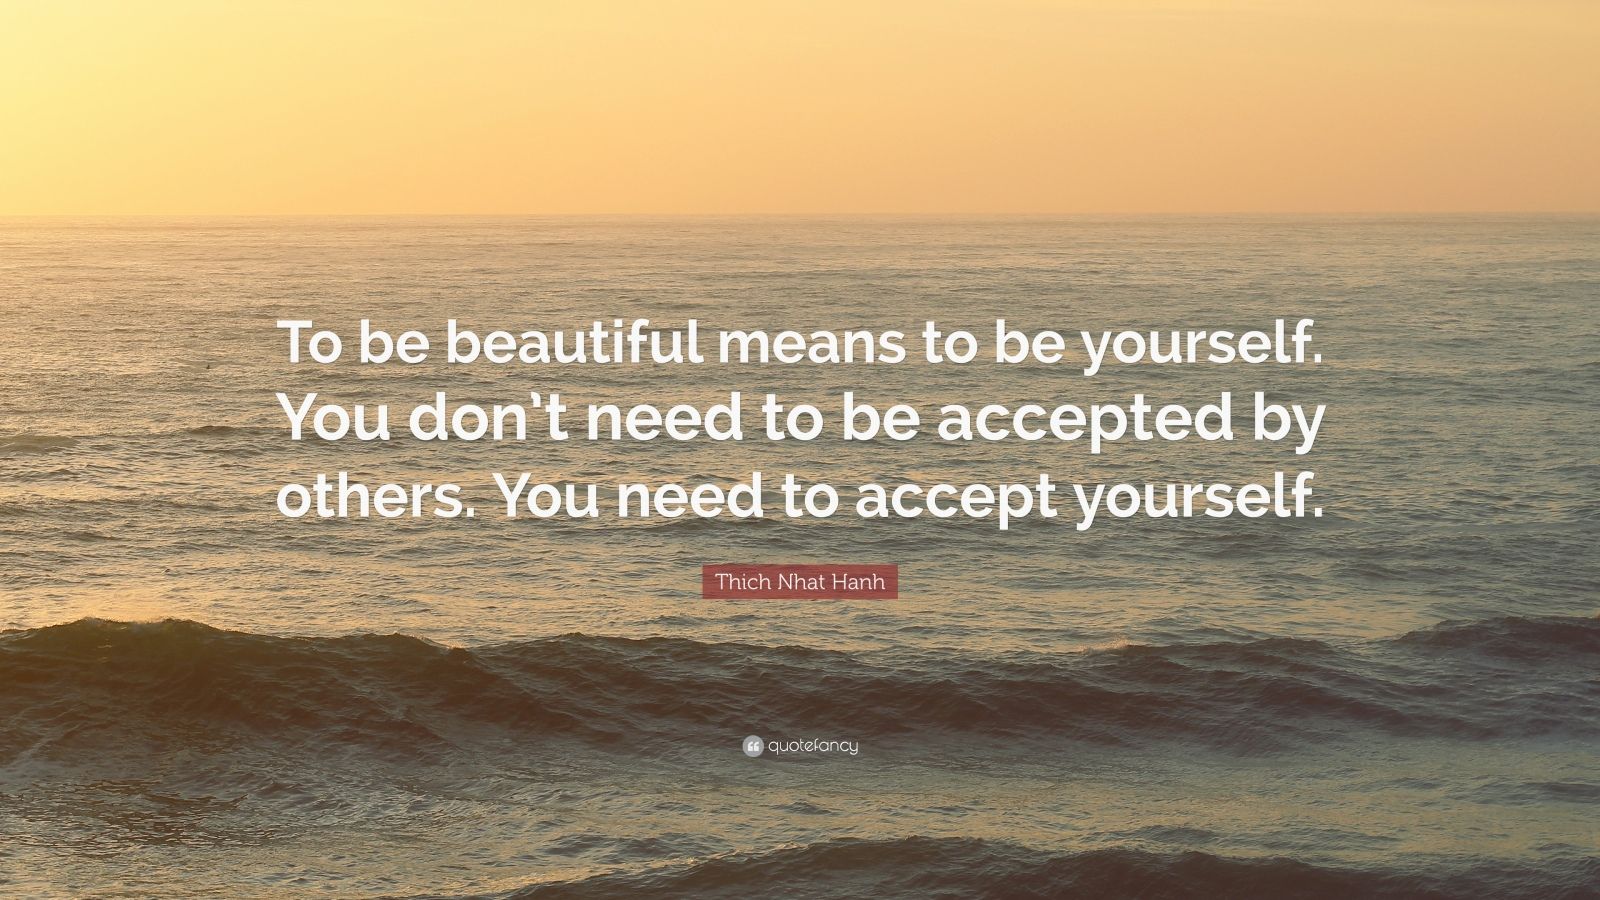 Thich Nhat Hanh Quote: “To be beautiful means to be yourself. You don’t ...